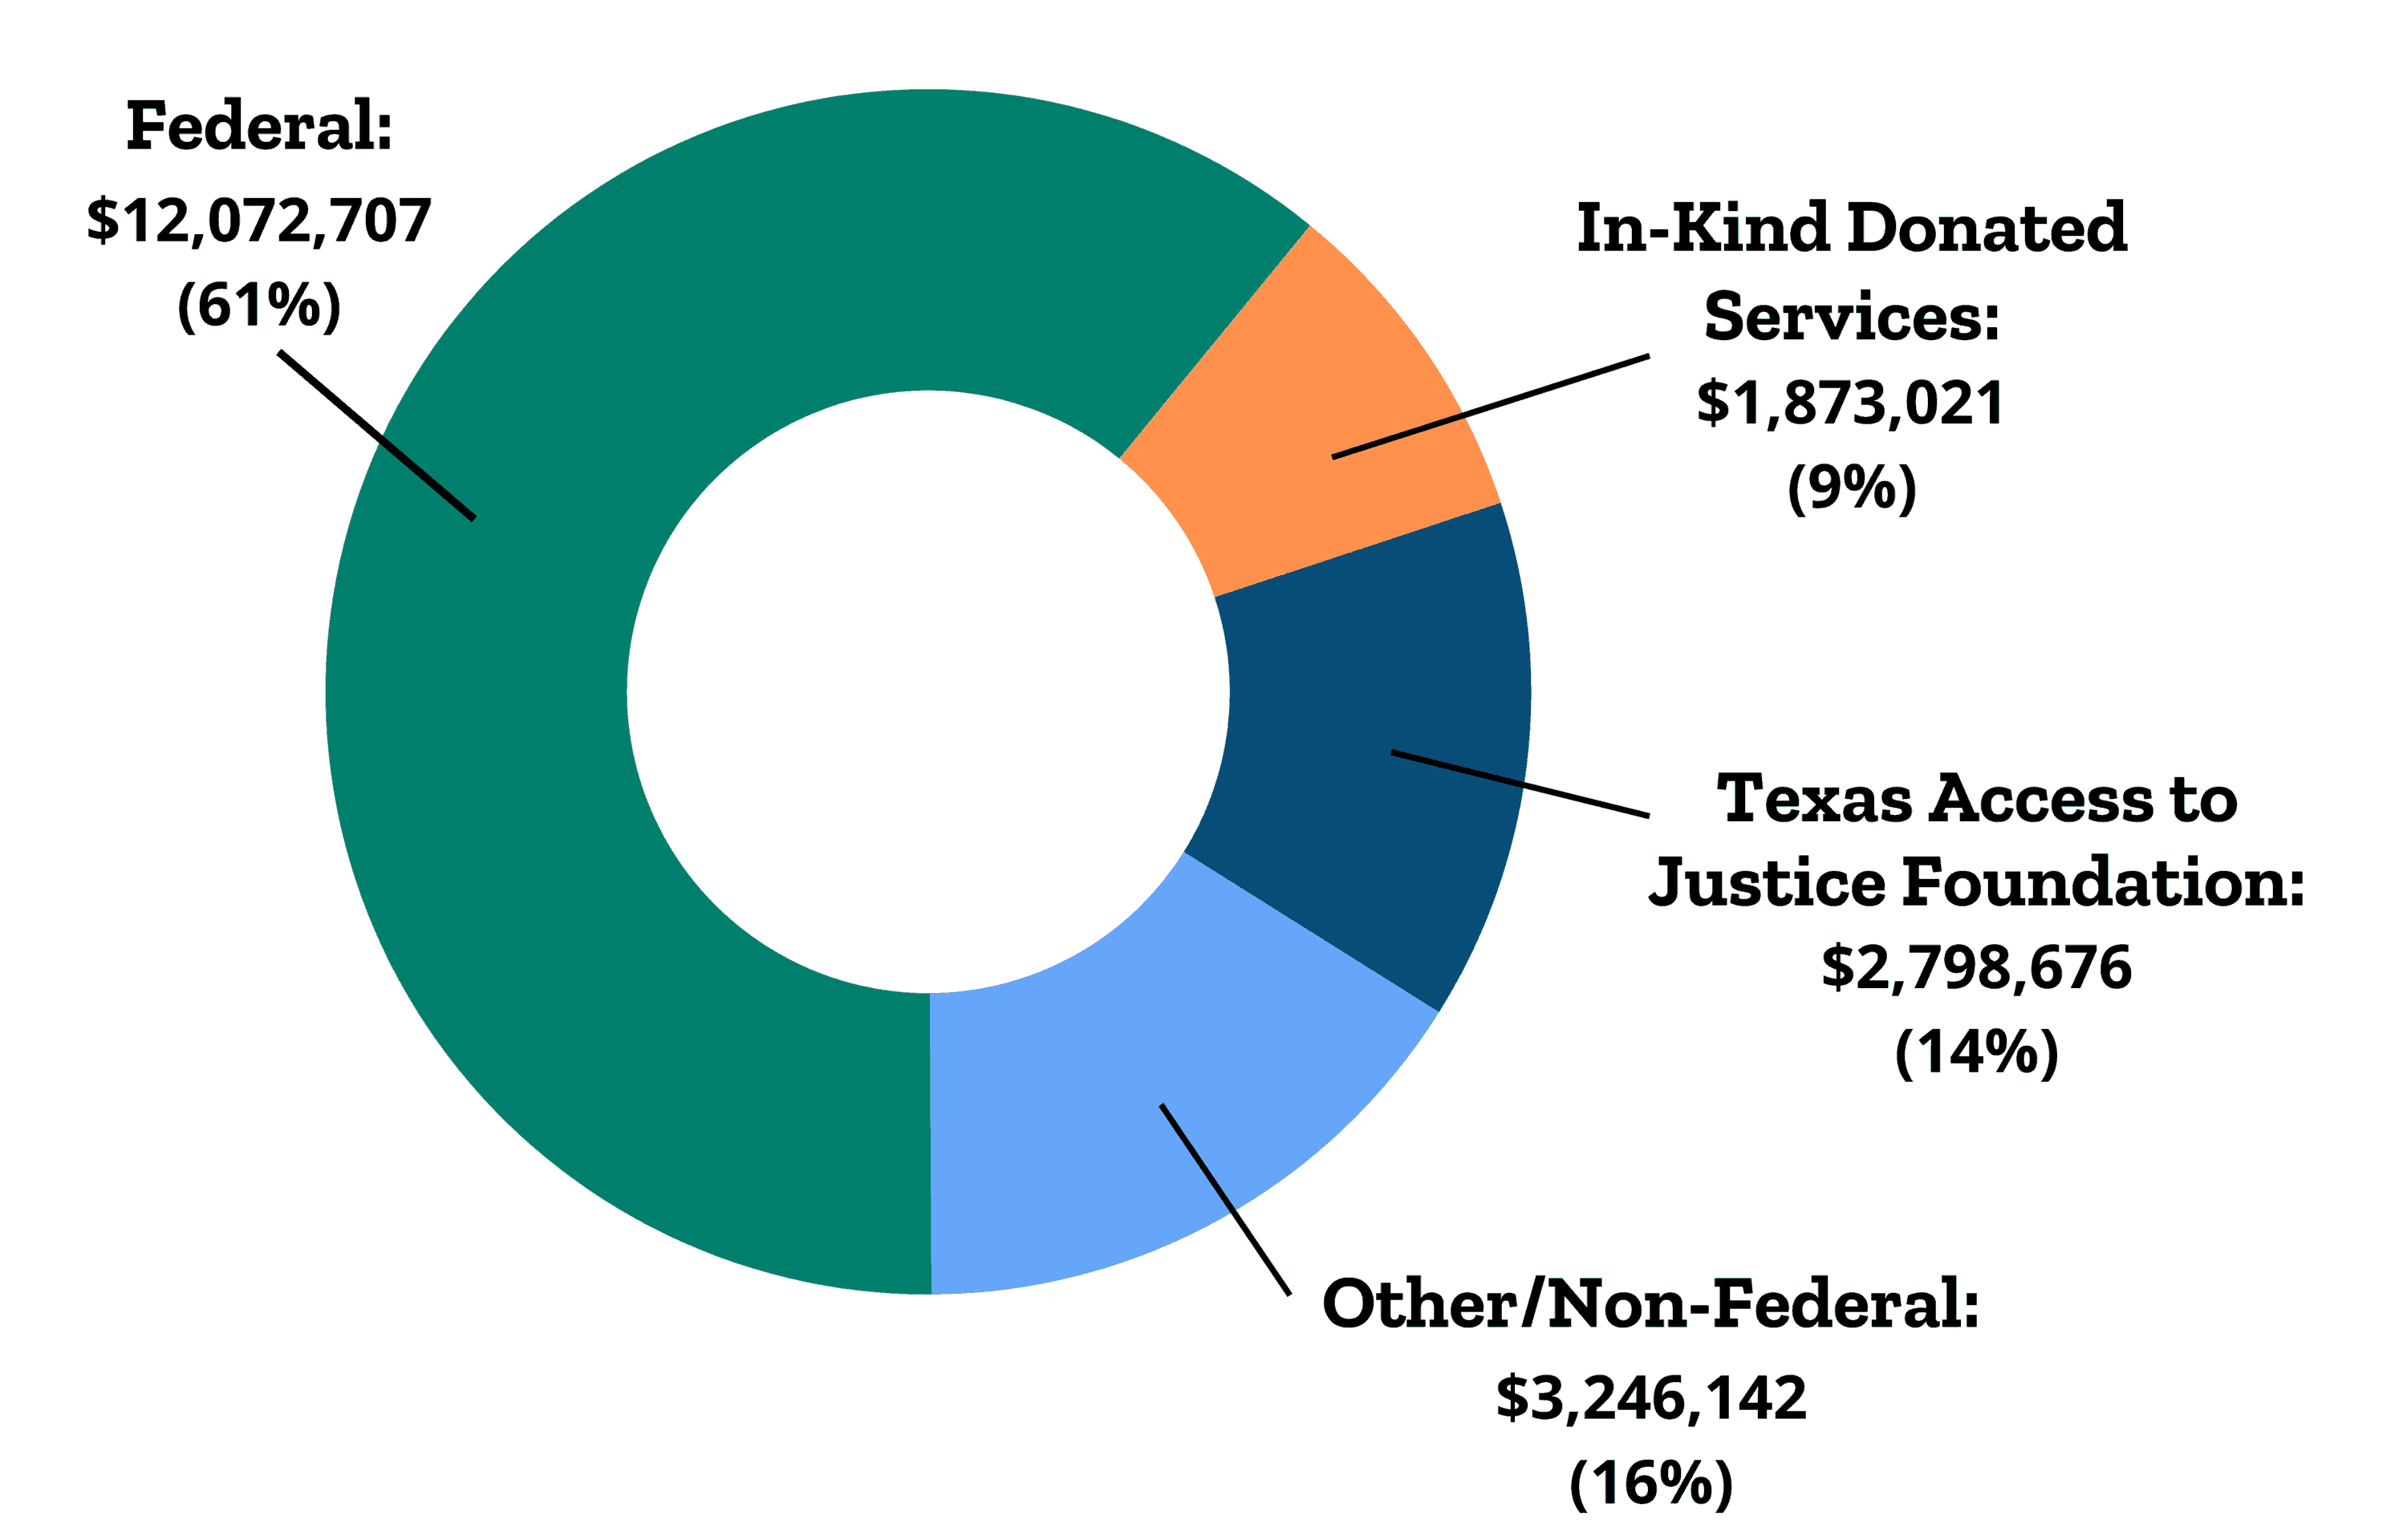 A pie chart showing DRTx funding sources. $12.1 million (61%) is federal funding, $3.2 million (16%) is from other non-federal sources, $2.7 million (14%) is from TAJF, and $1.9 million is from In-Kind Donated Services (9%).